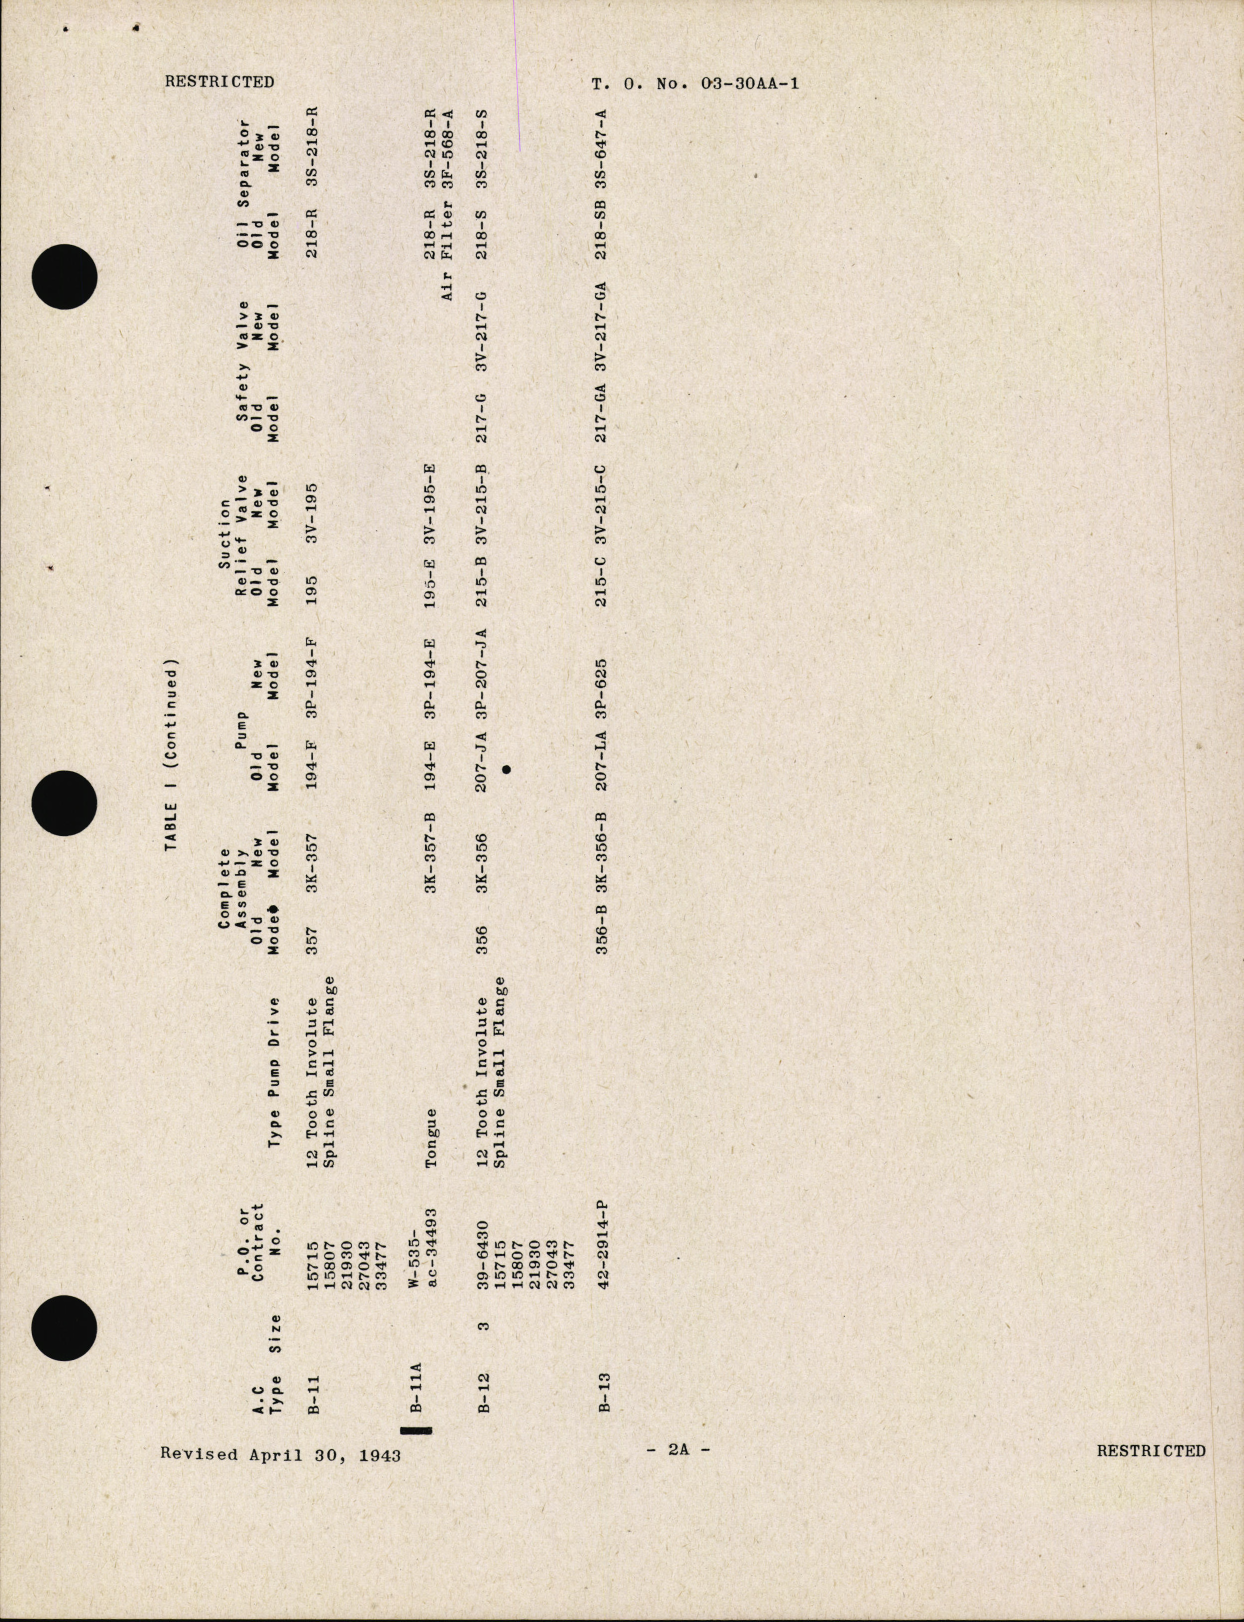 Sample page 7 from AirCorps Library document: Handbook of Instructions with Parts Catalog for Engine-Driven Vacuum Pumps